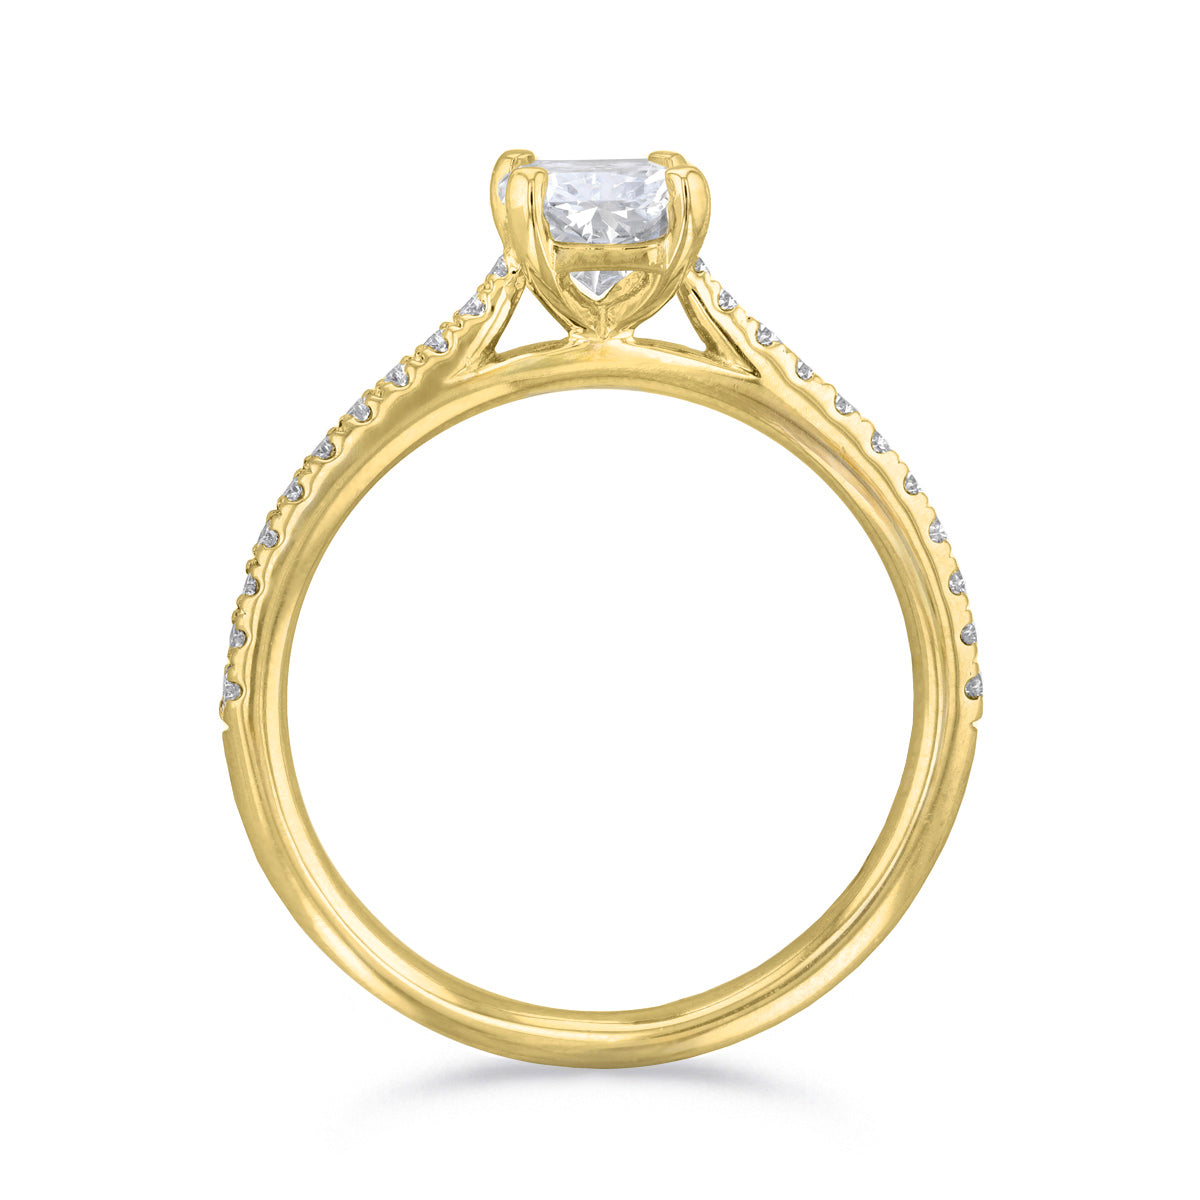 0-50ct-ophelia-shoulder-set-radiant-cut-solitaire-diamond-engagement-ring-18ct-yellow-gold